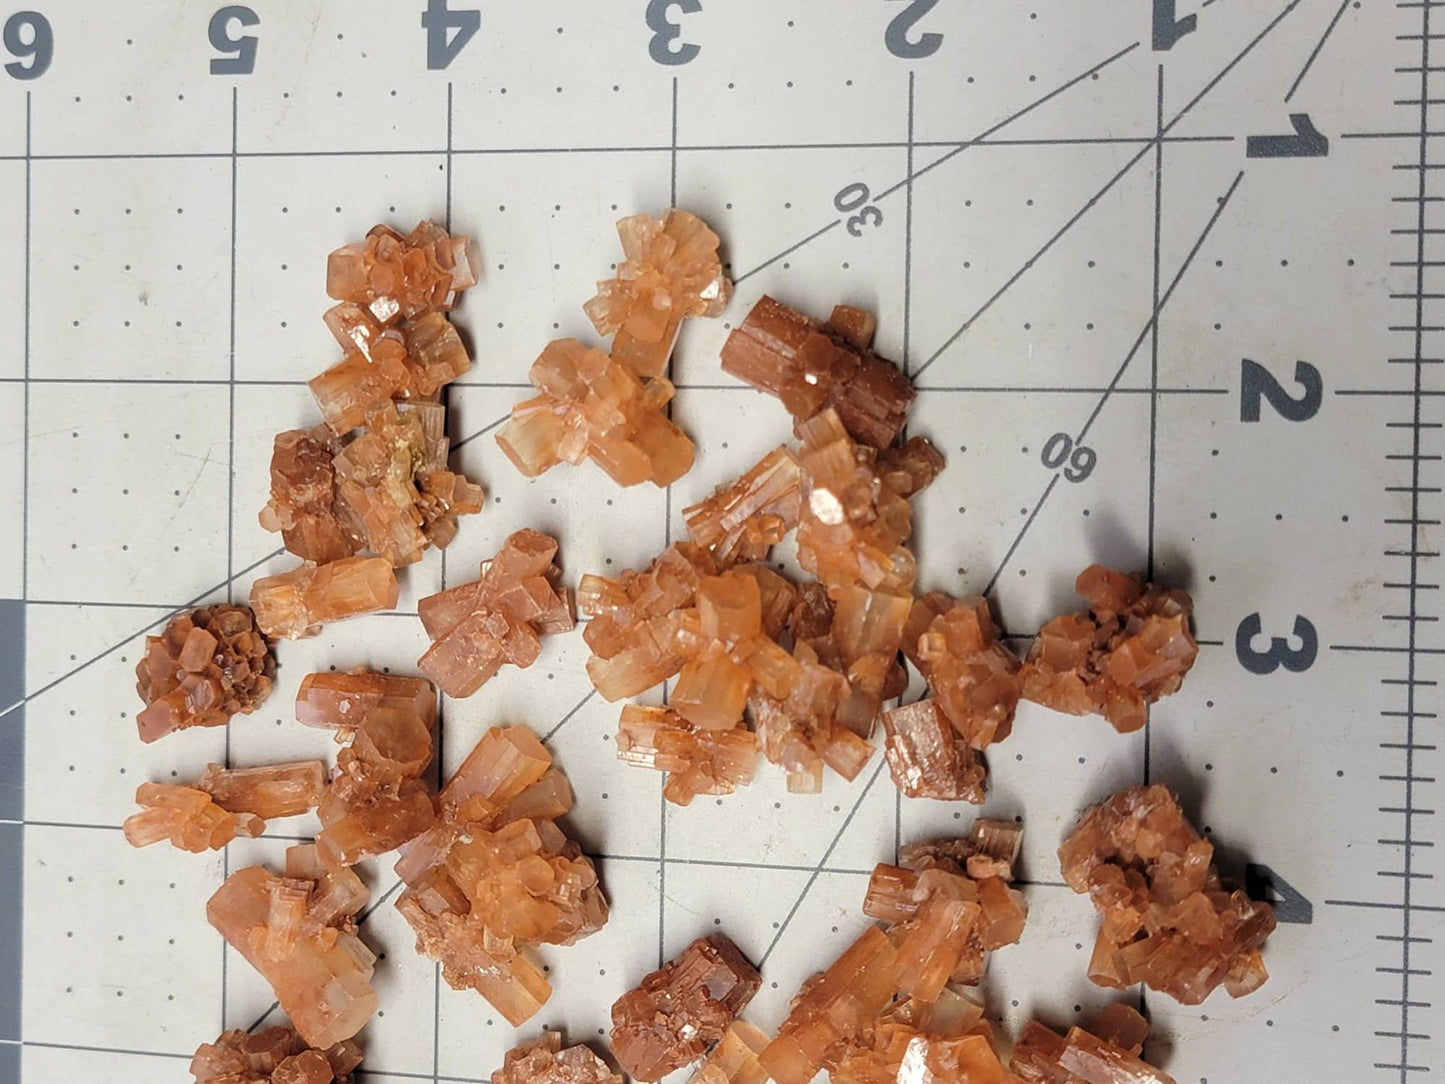 Aragonite Small/Tiny Crystal Cluster Explosion. Grounding Focused Attention 1320 (Approx. 5/8" - 1")